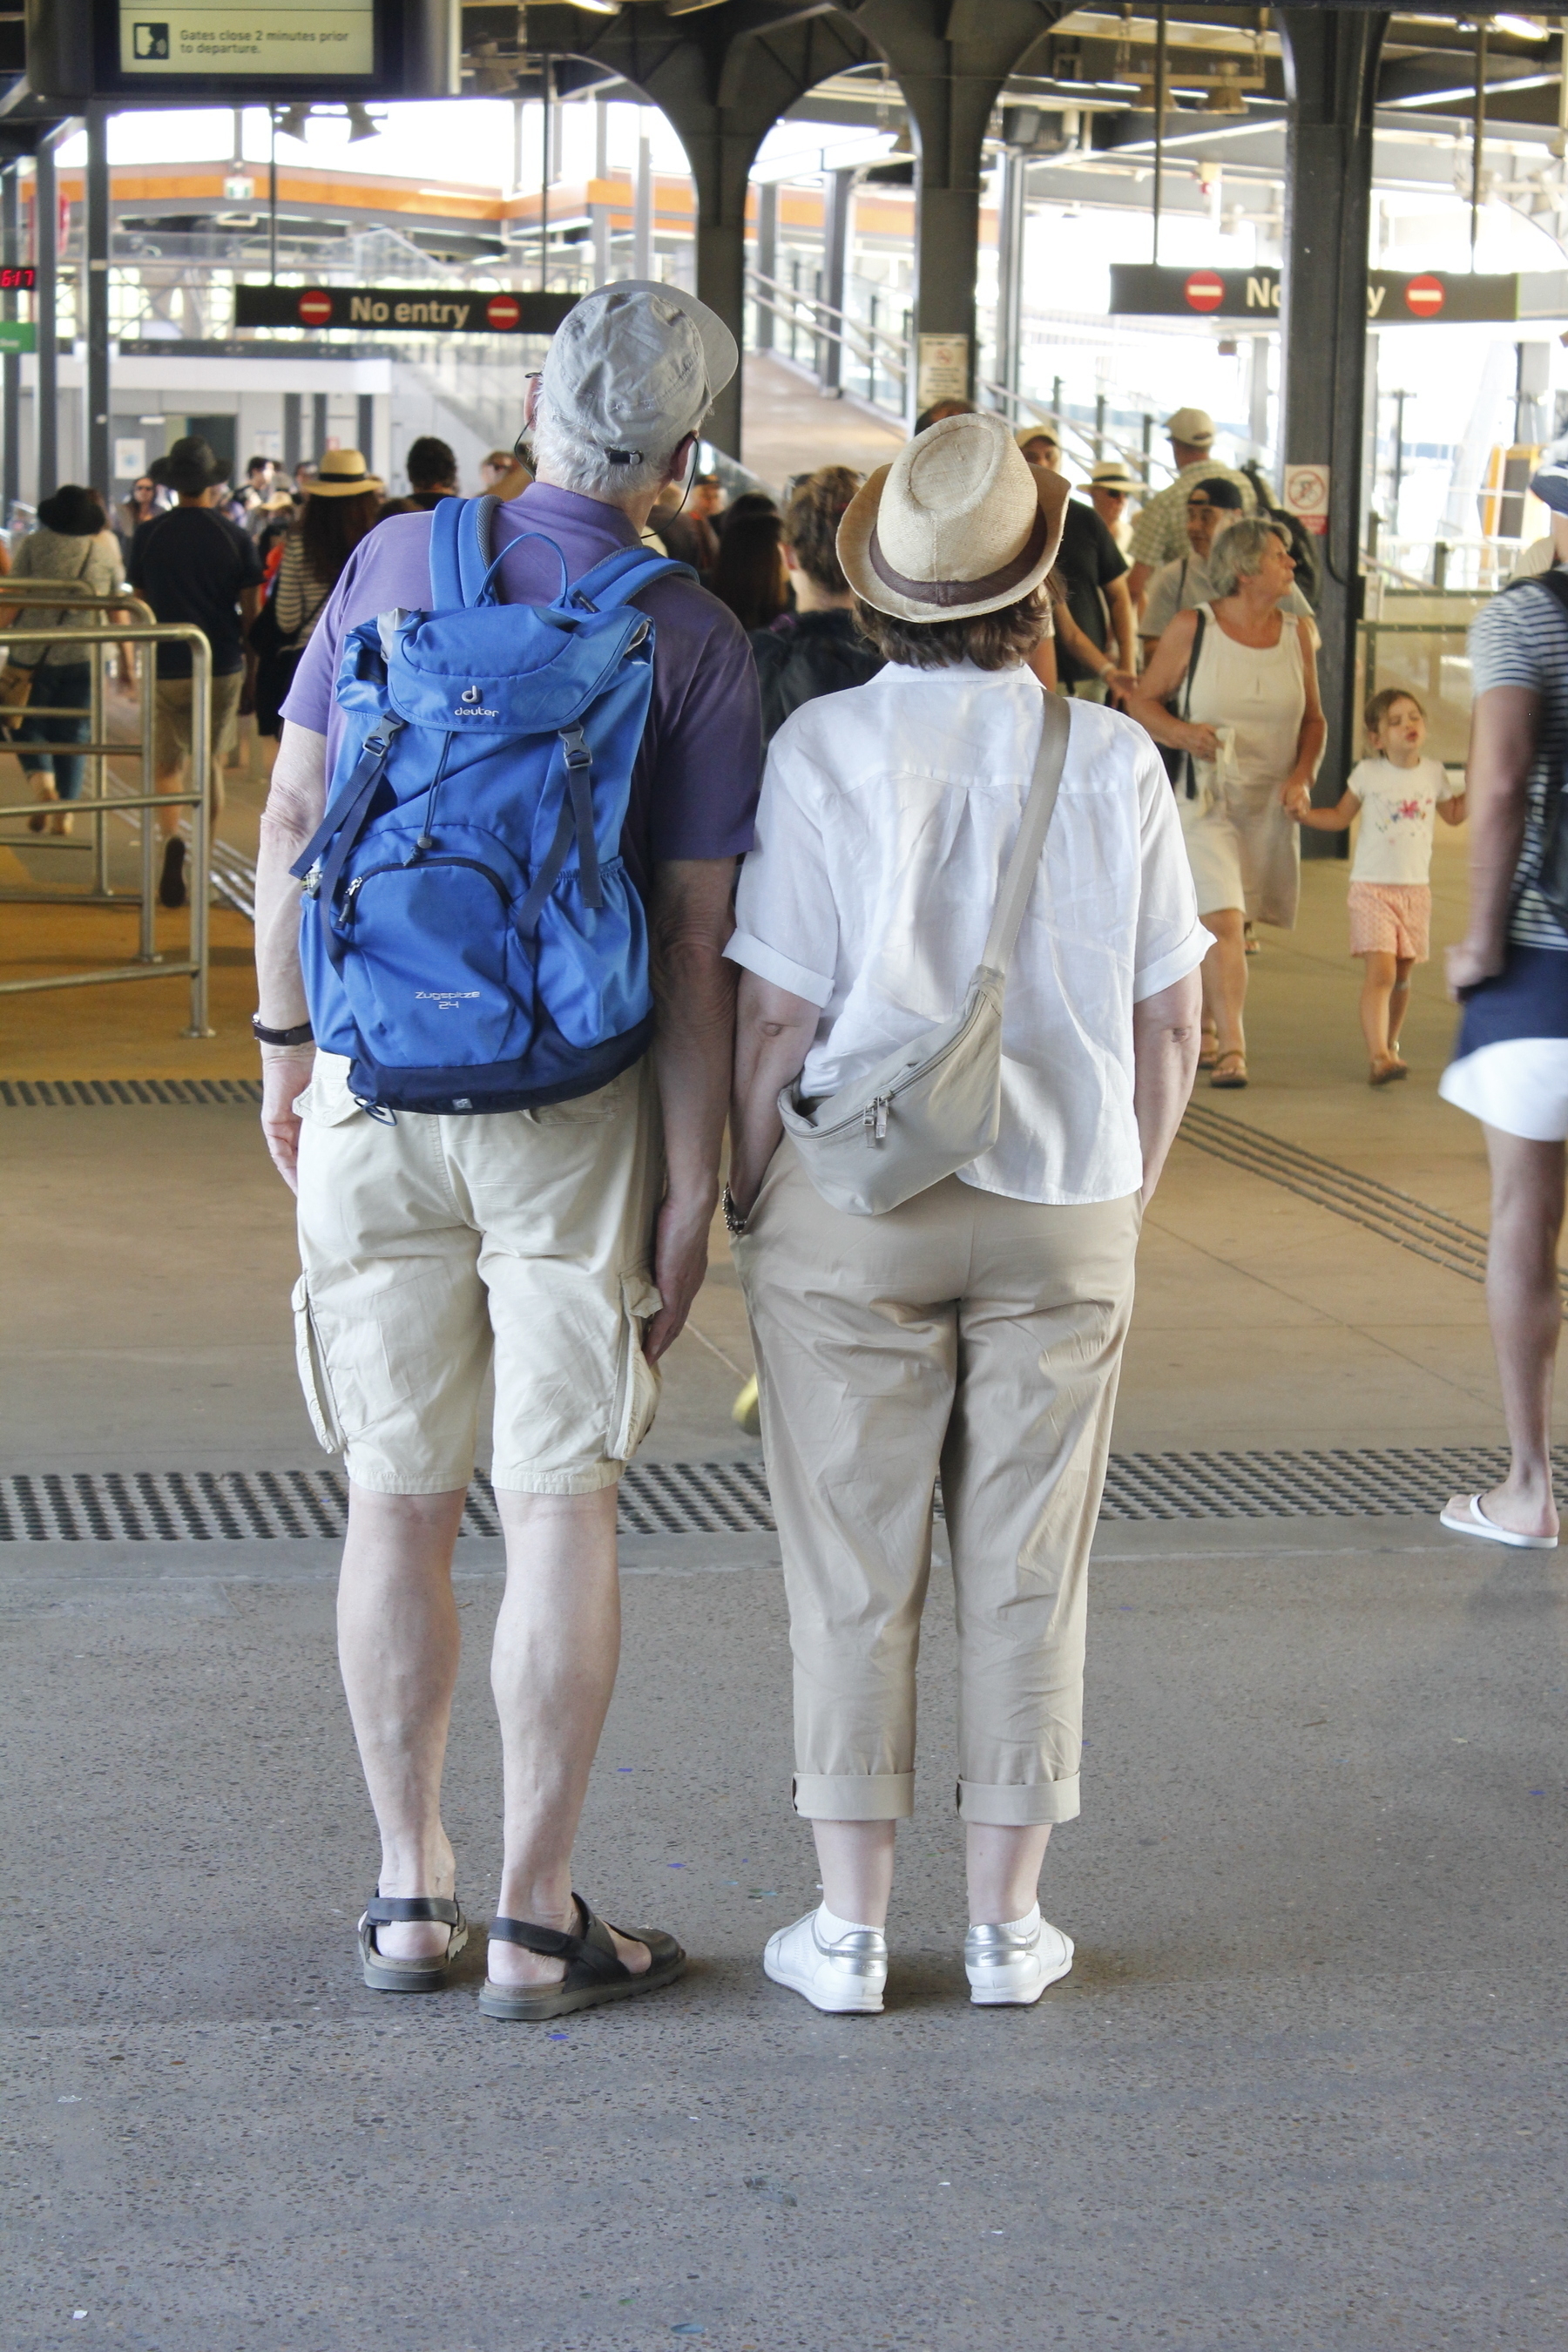 A middle-aged couple seen from behind, standing side by side, heads raised and angled in the same direction to read the ferry departure times. A crowd of disembarking passengers walks towards them.